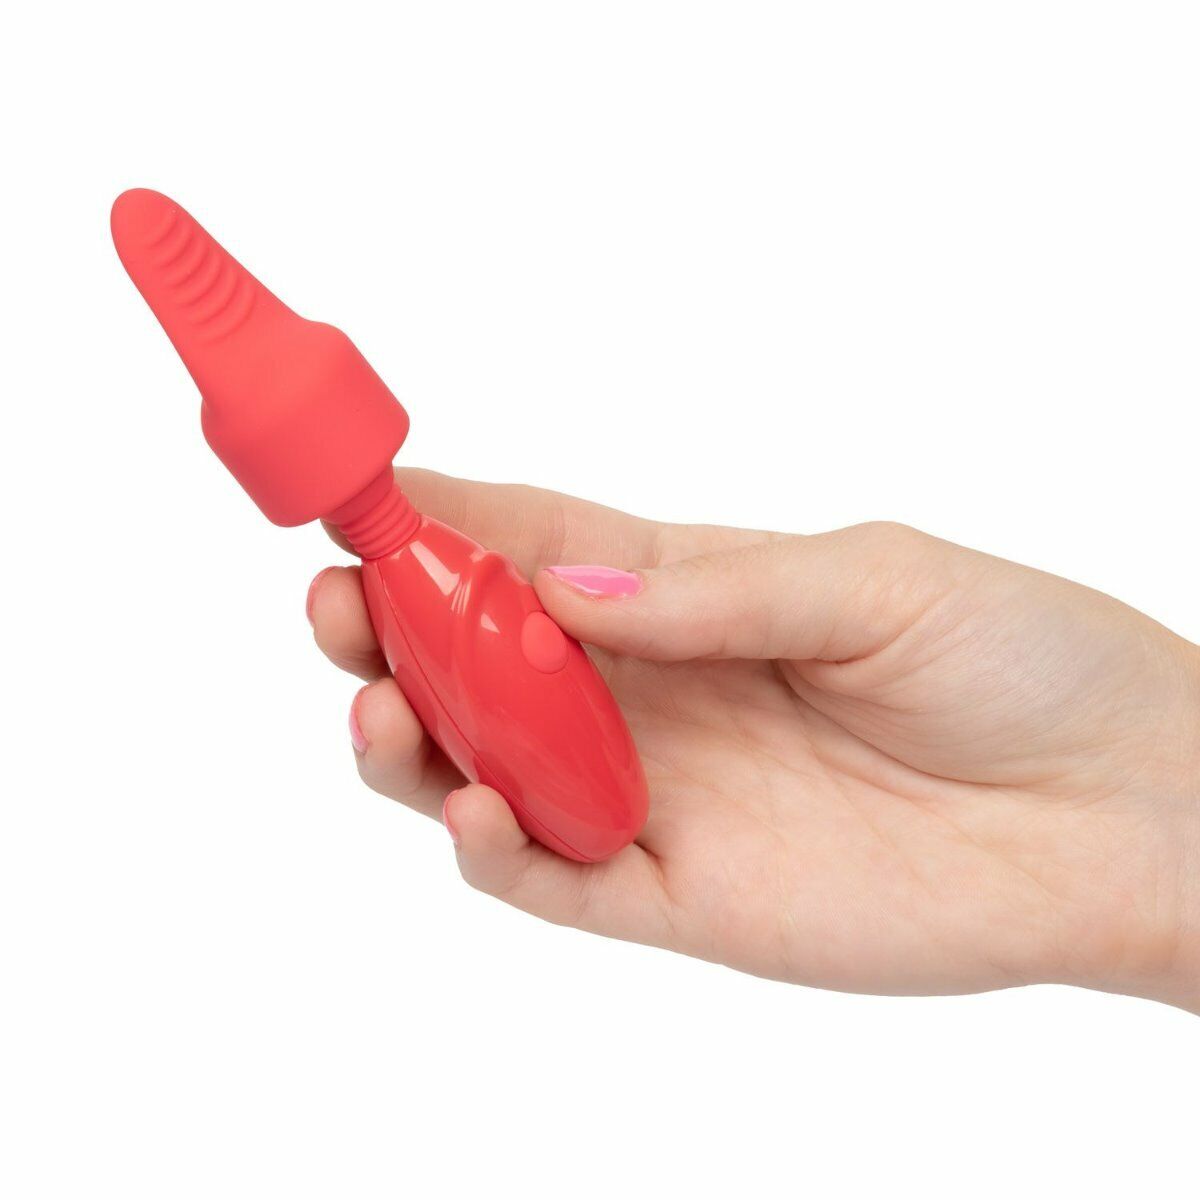 Rechargeable Massager Kit Clit Nipple Vibrator Foreplay Sex-toys for Women